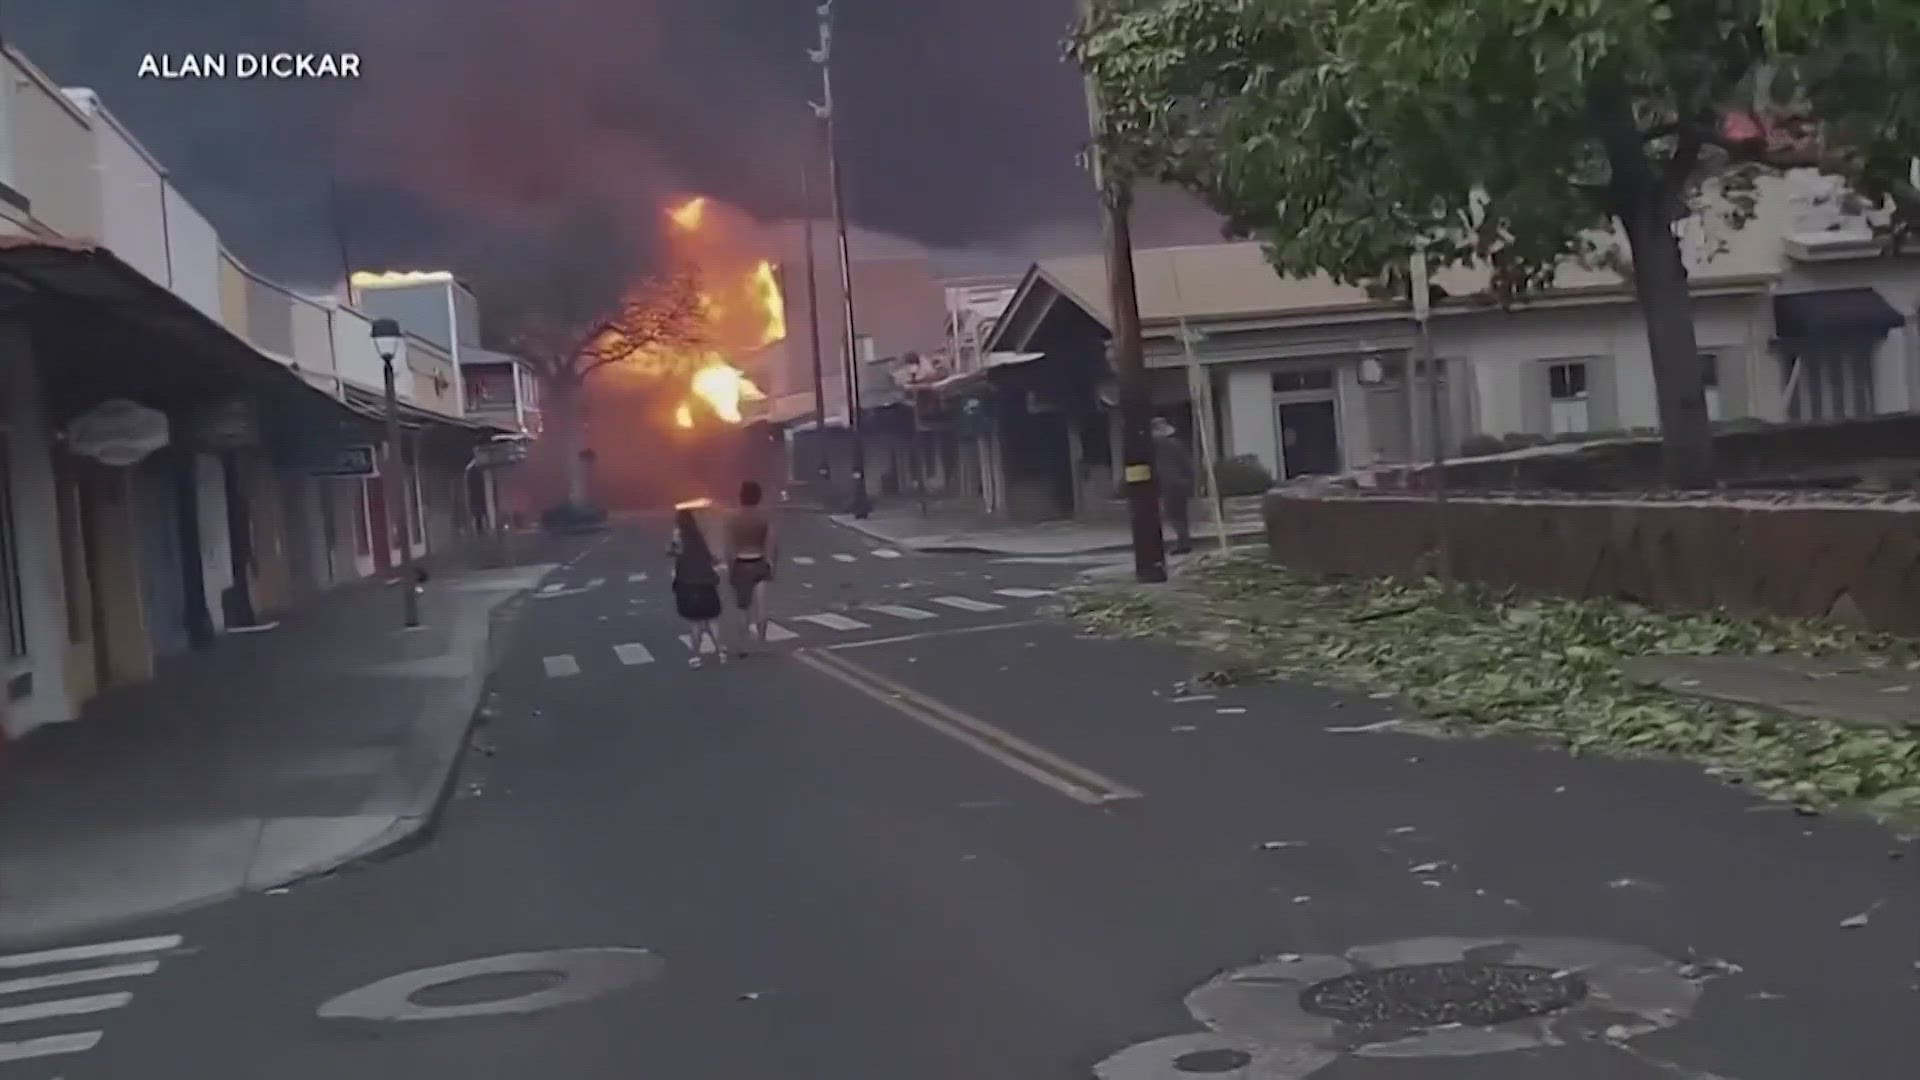 Wildfires in Hawaii destroyed multiple buildings and structures in historic Lahaina. Schools closed and people were forced to evacuate several areas on Wednesday.